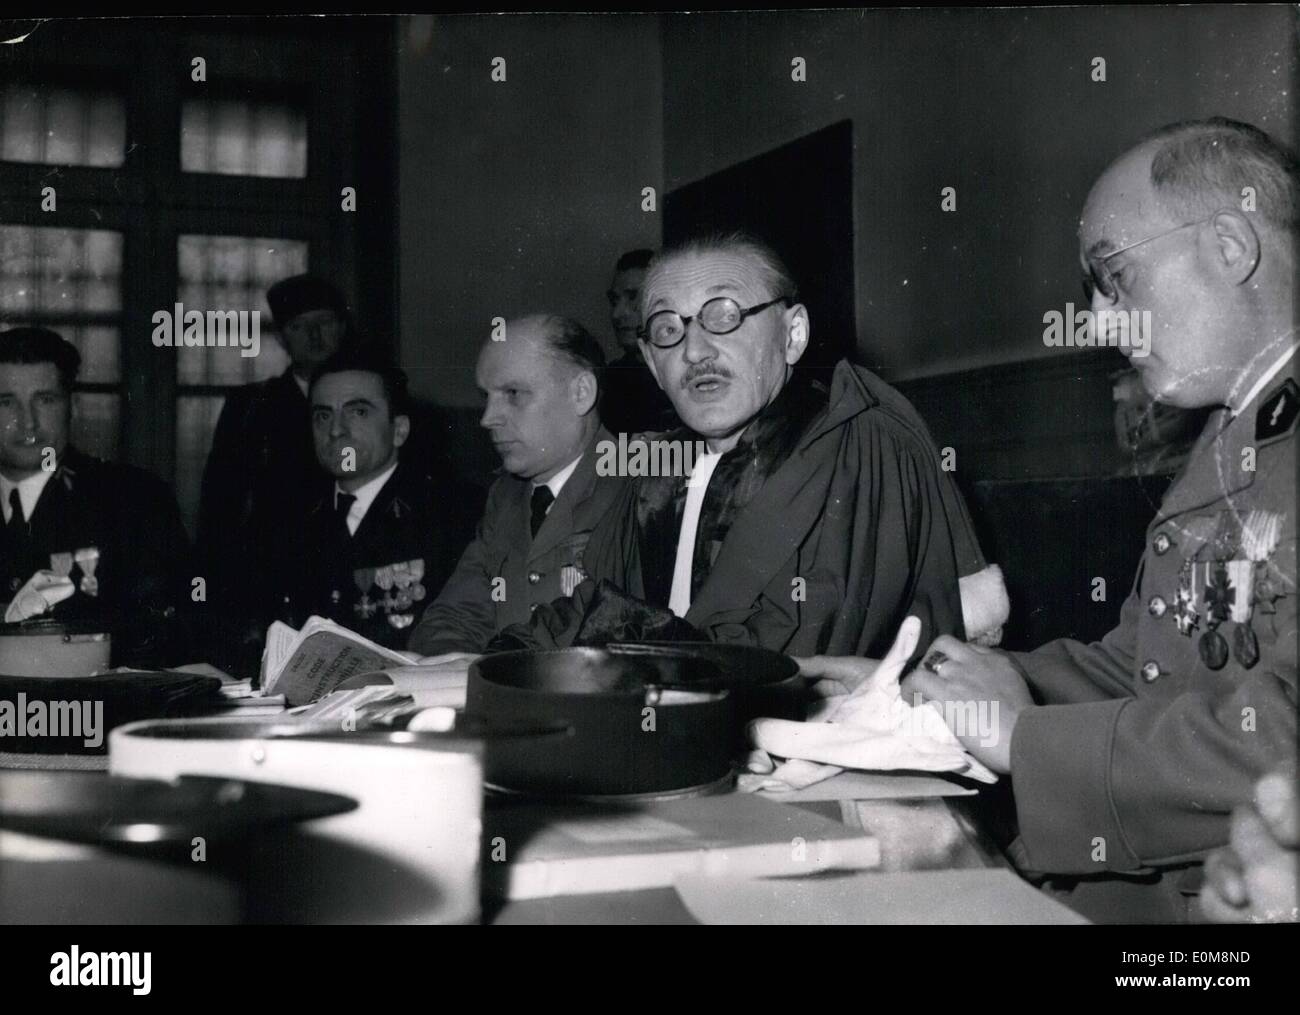 Feb. 02, 1954 - S.S. General Oberg Goes On Trial: Members of the Military Tribunal during the opening of the trial at the Cherche Midi Prison, Paris, today. General Oberg, former chief of the Gestapo in occupied France, is charged with deportations, executives and Torturing of resistant. He was arrested in Germany over 9 year ago Stock Photo